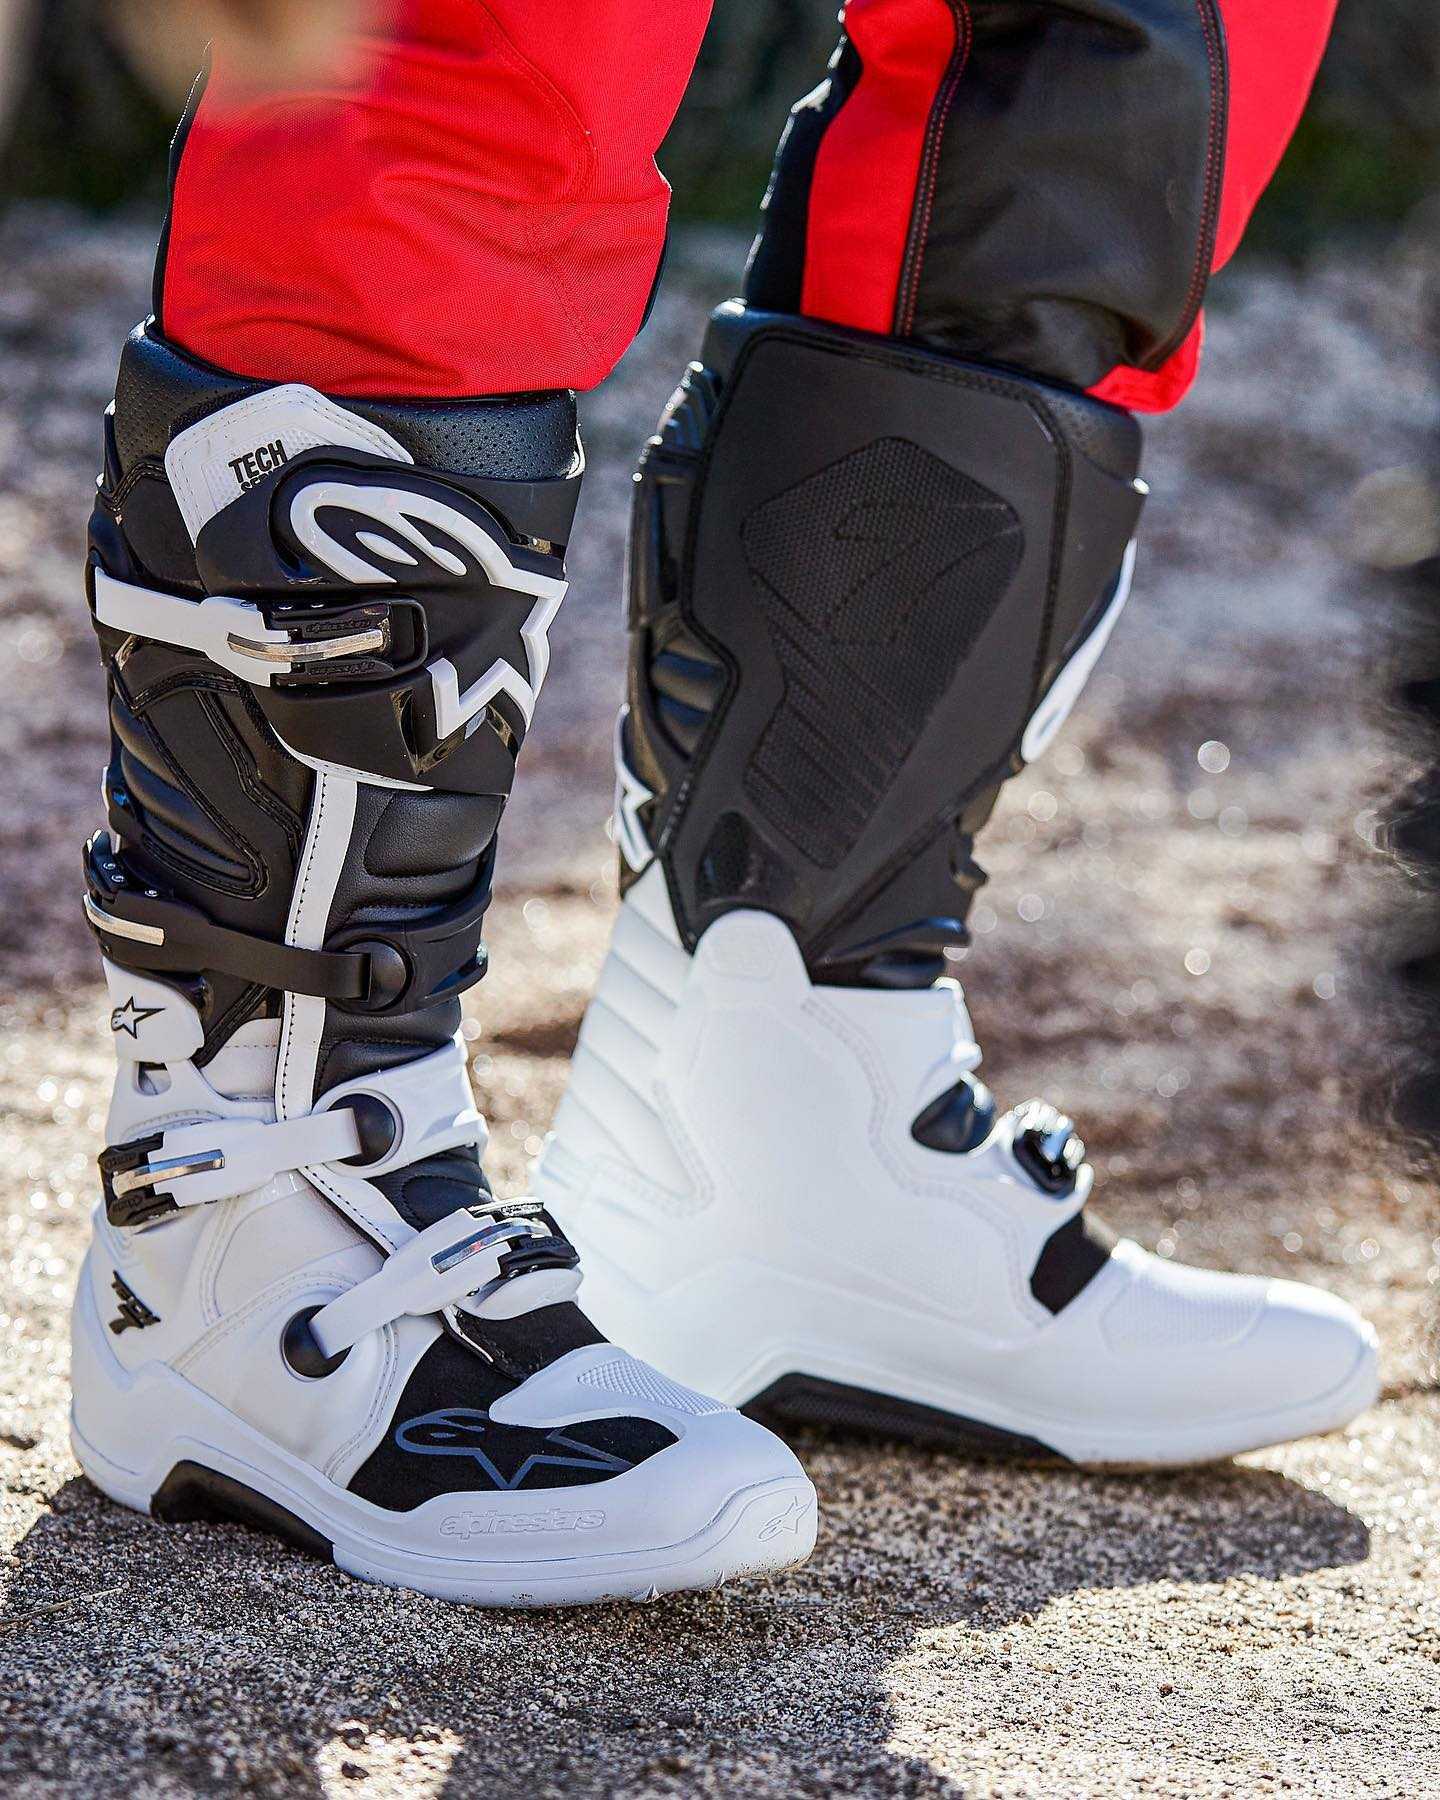 Alpinestars Tech 3's and Tech 7's: What you need to know